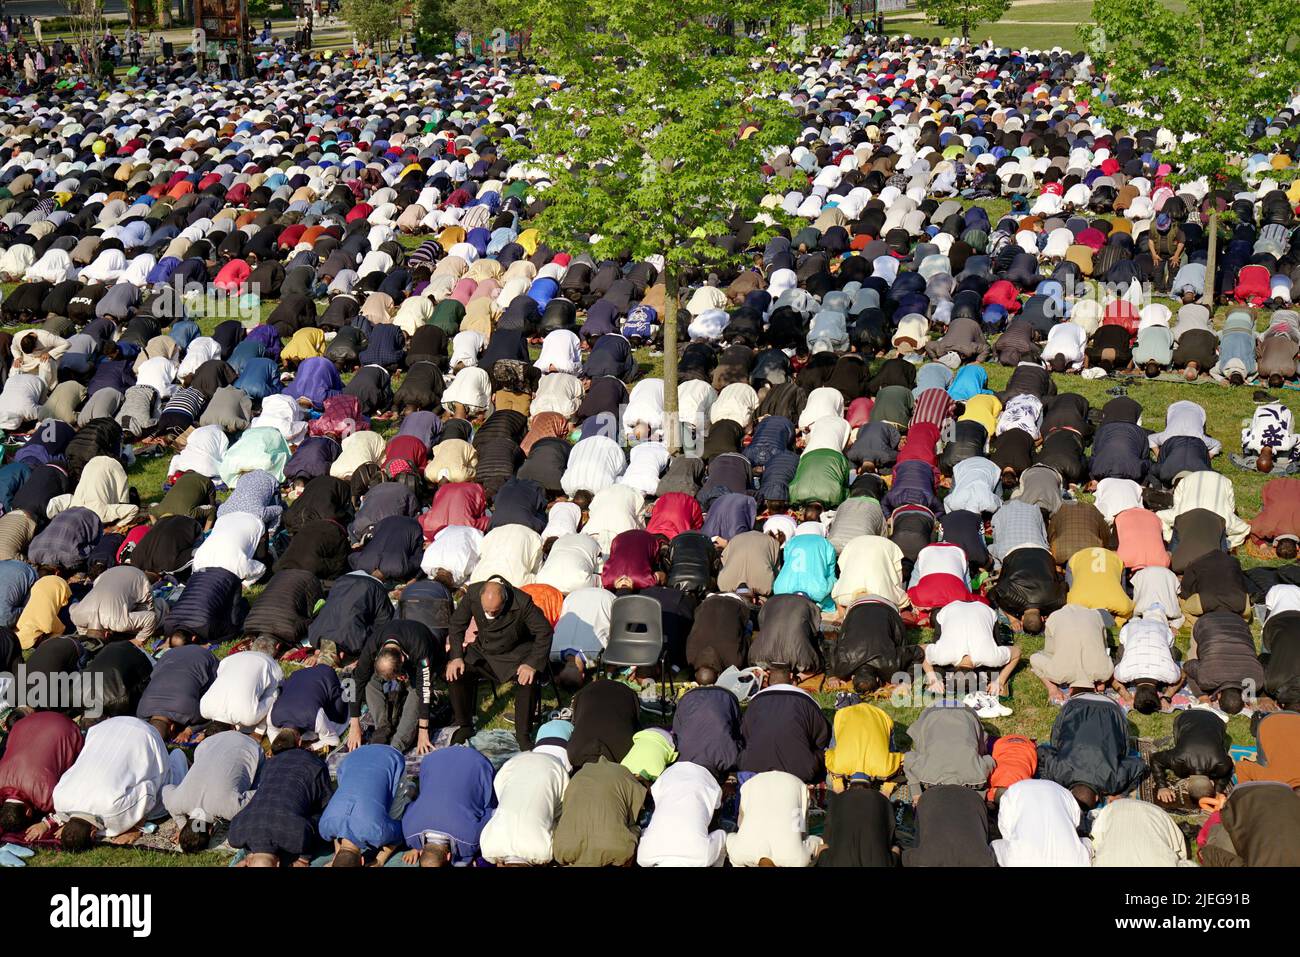 Muslims praying to celebrate the end of Ramadan. Turin, Italy - May 2022 Stock Photo